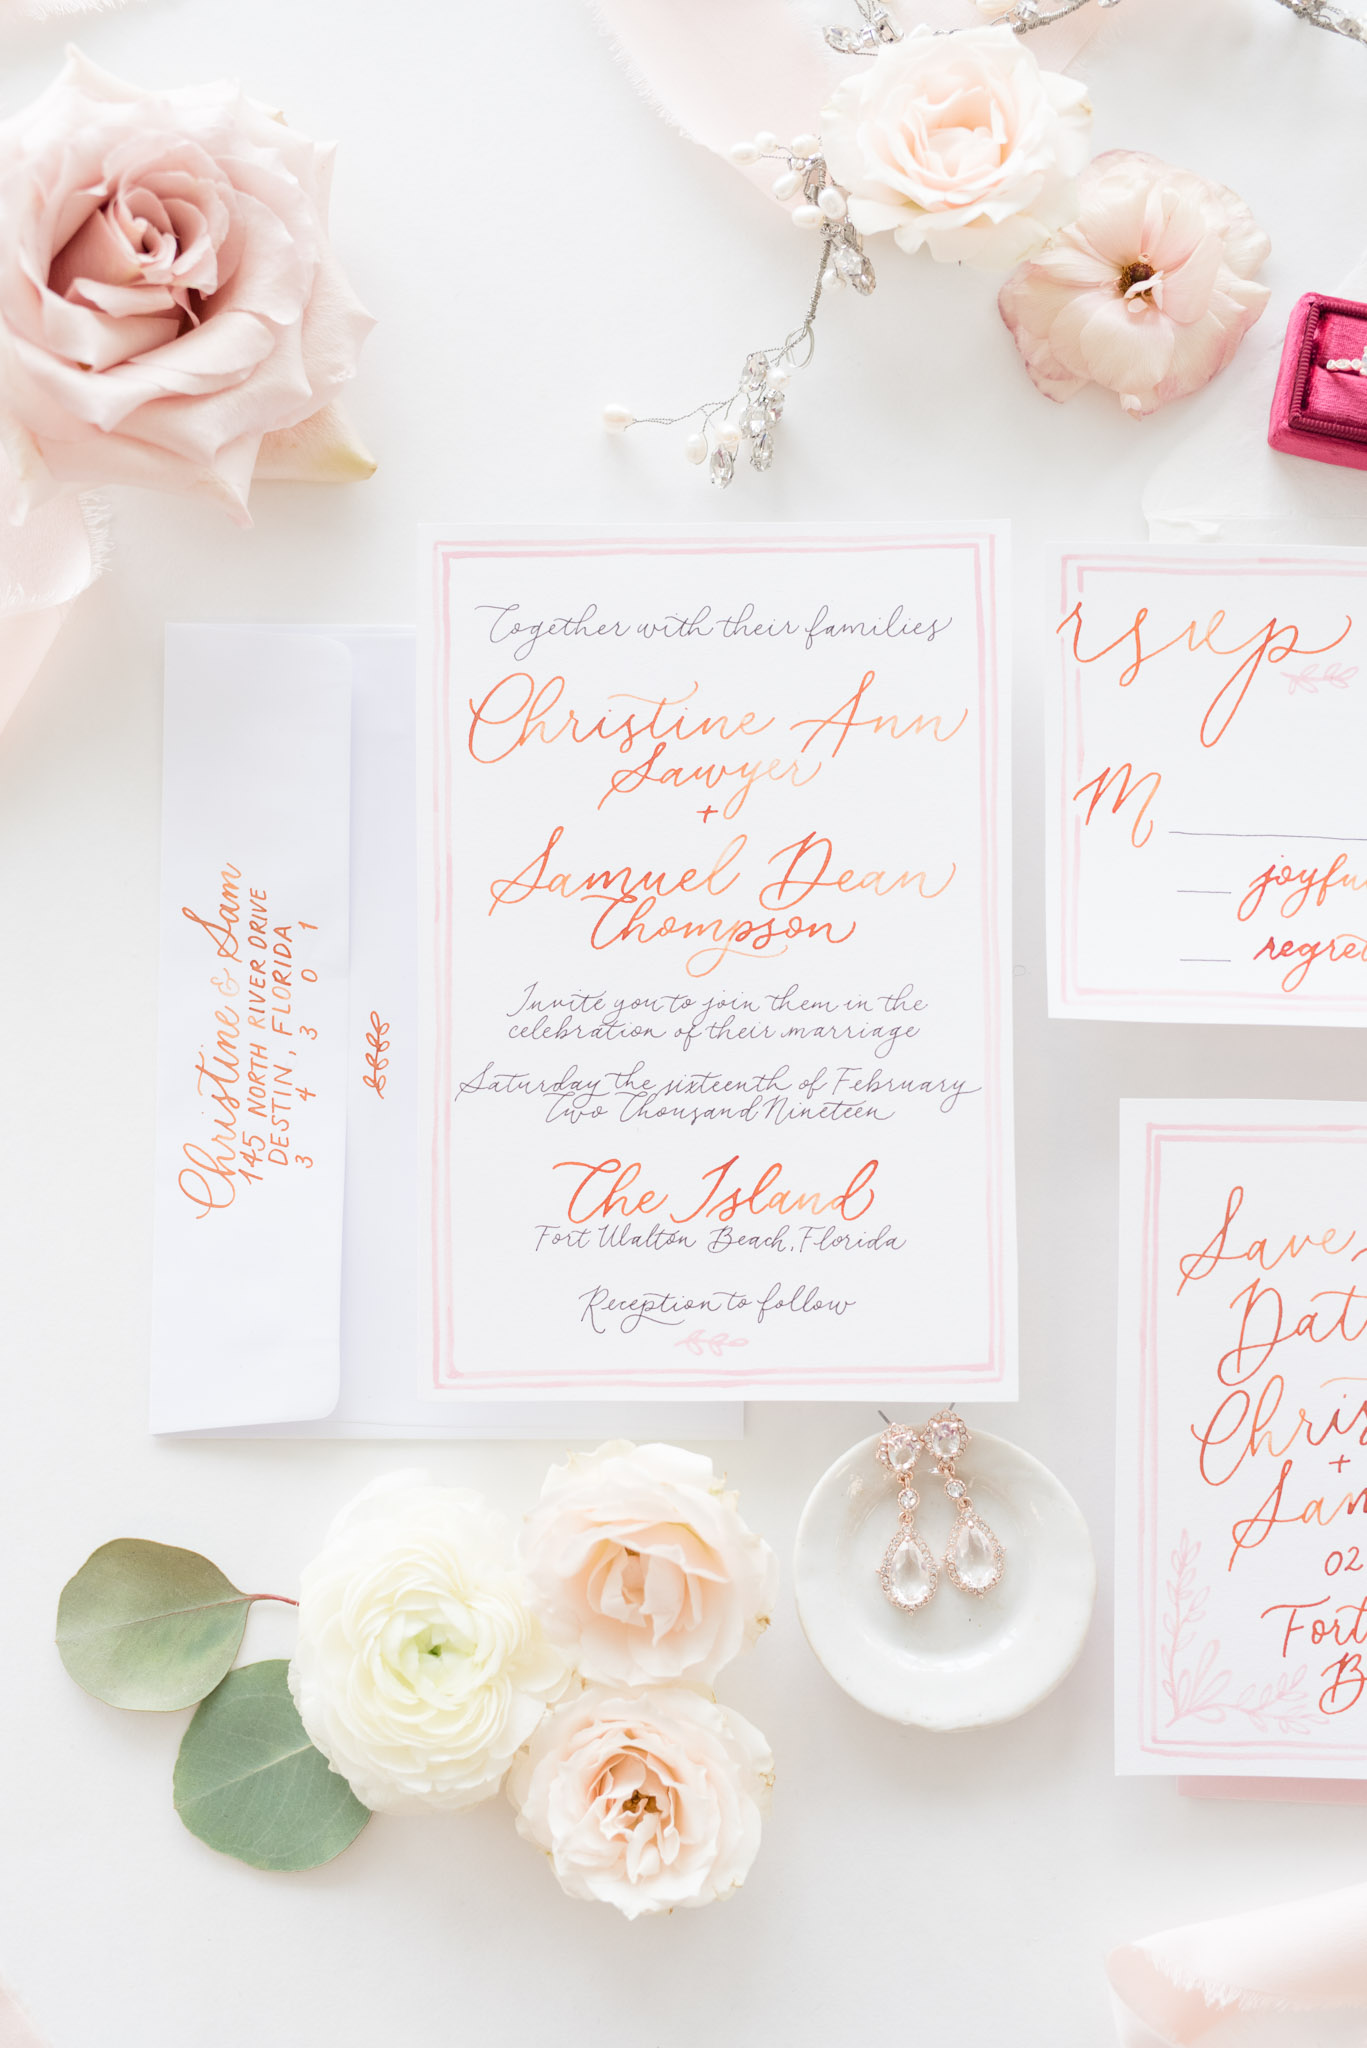 Pink and white wedding invitations.